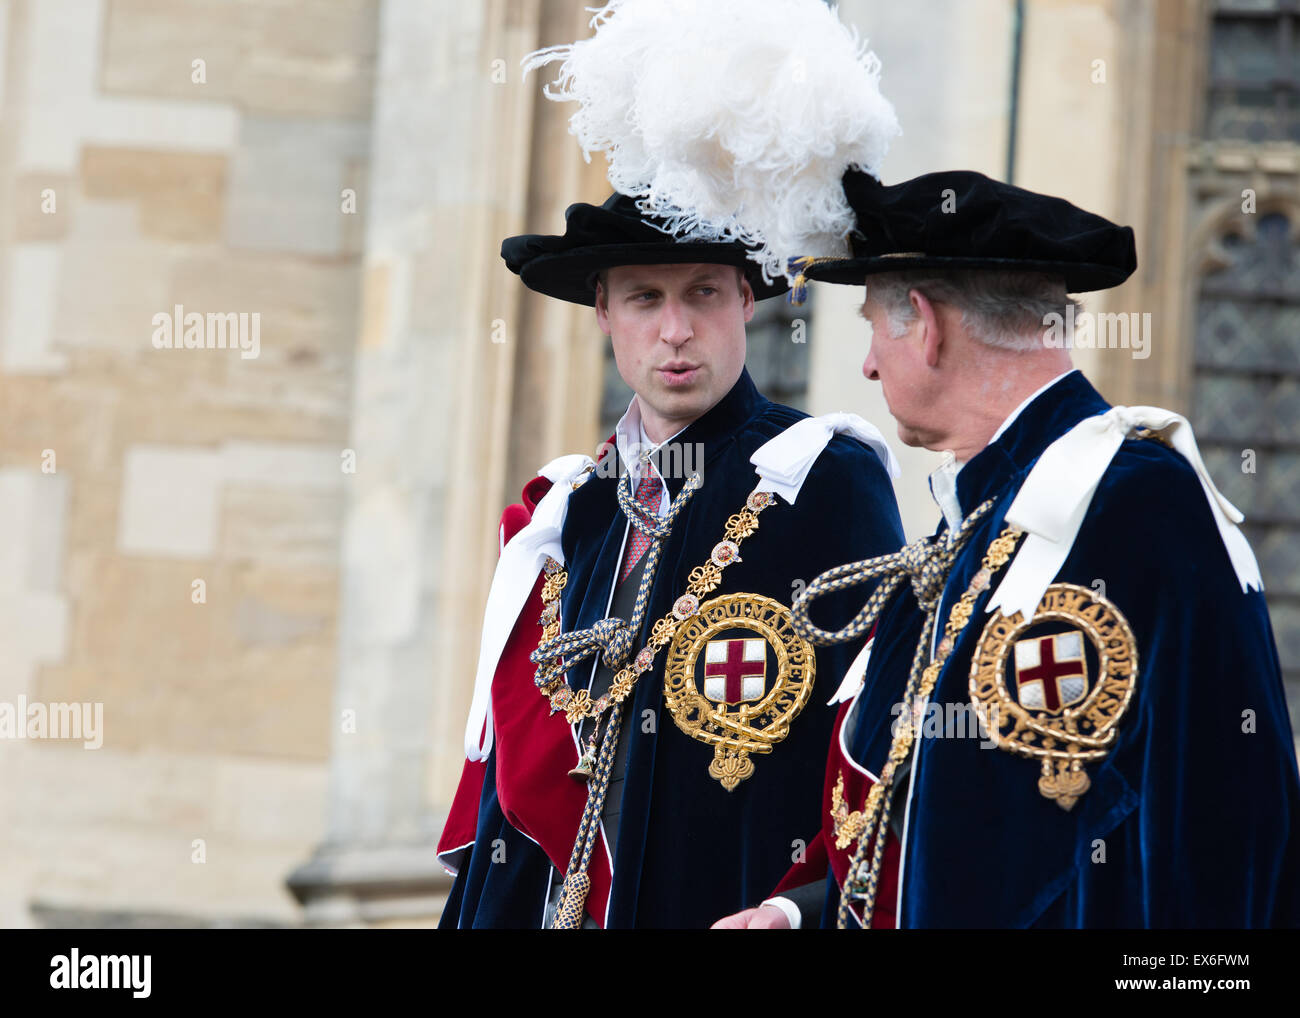 Prince Andrew talking toPrince Edward, Prince Charles and Prince William in the background wearing the Garter robes Stock Photo